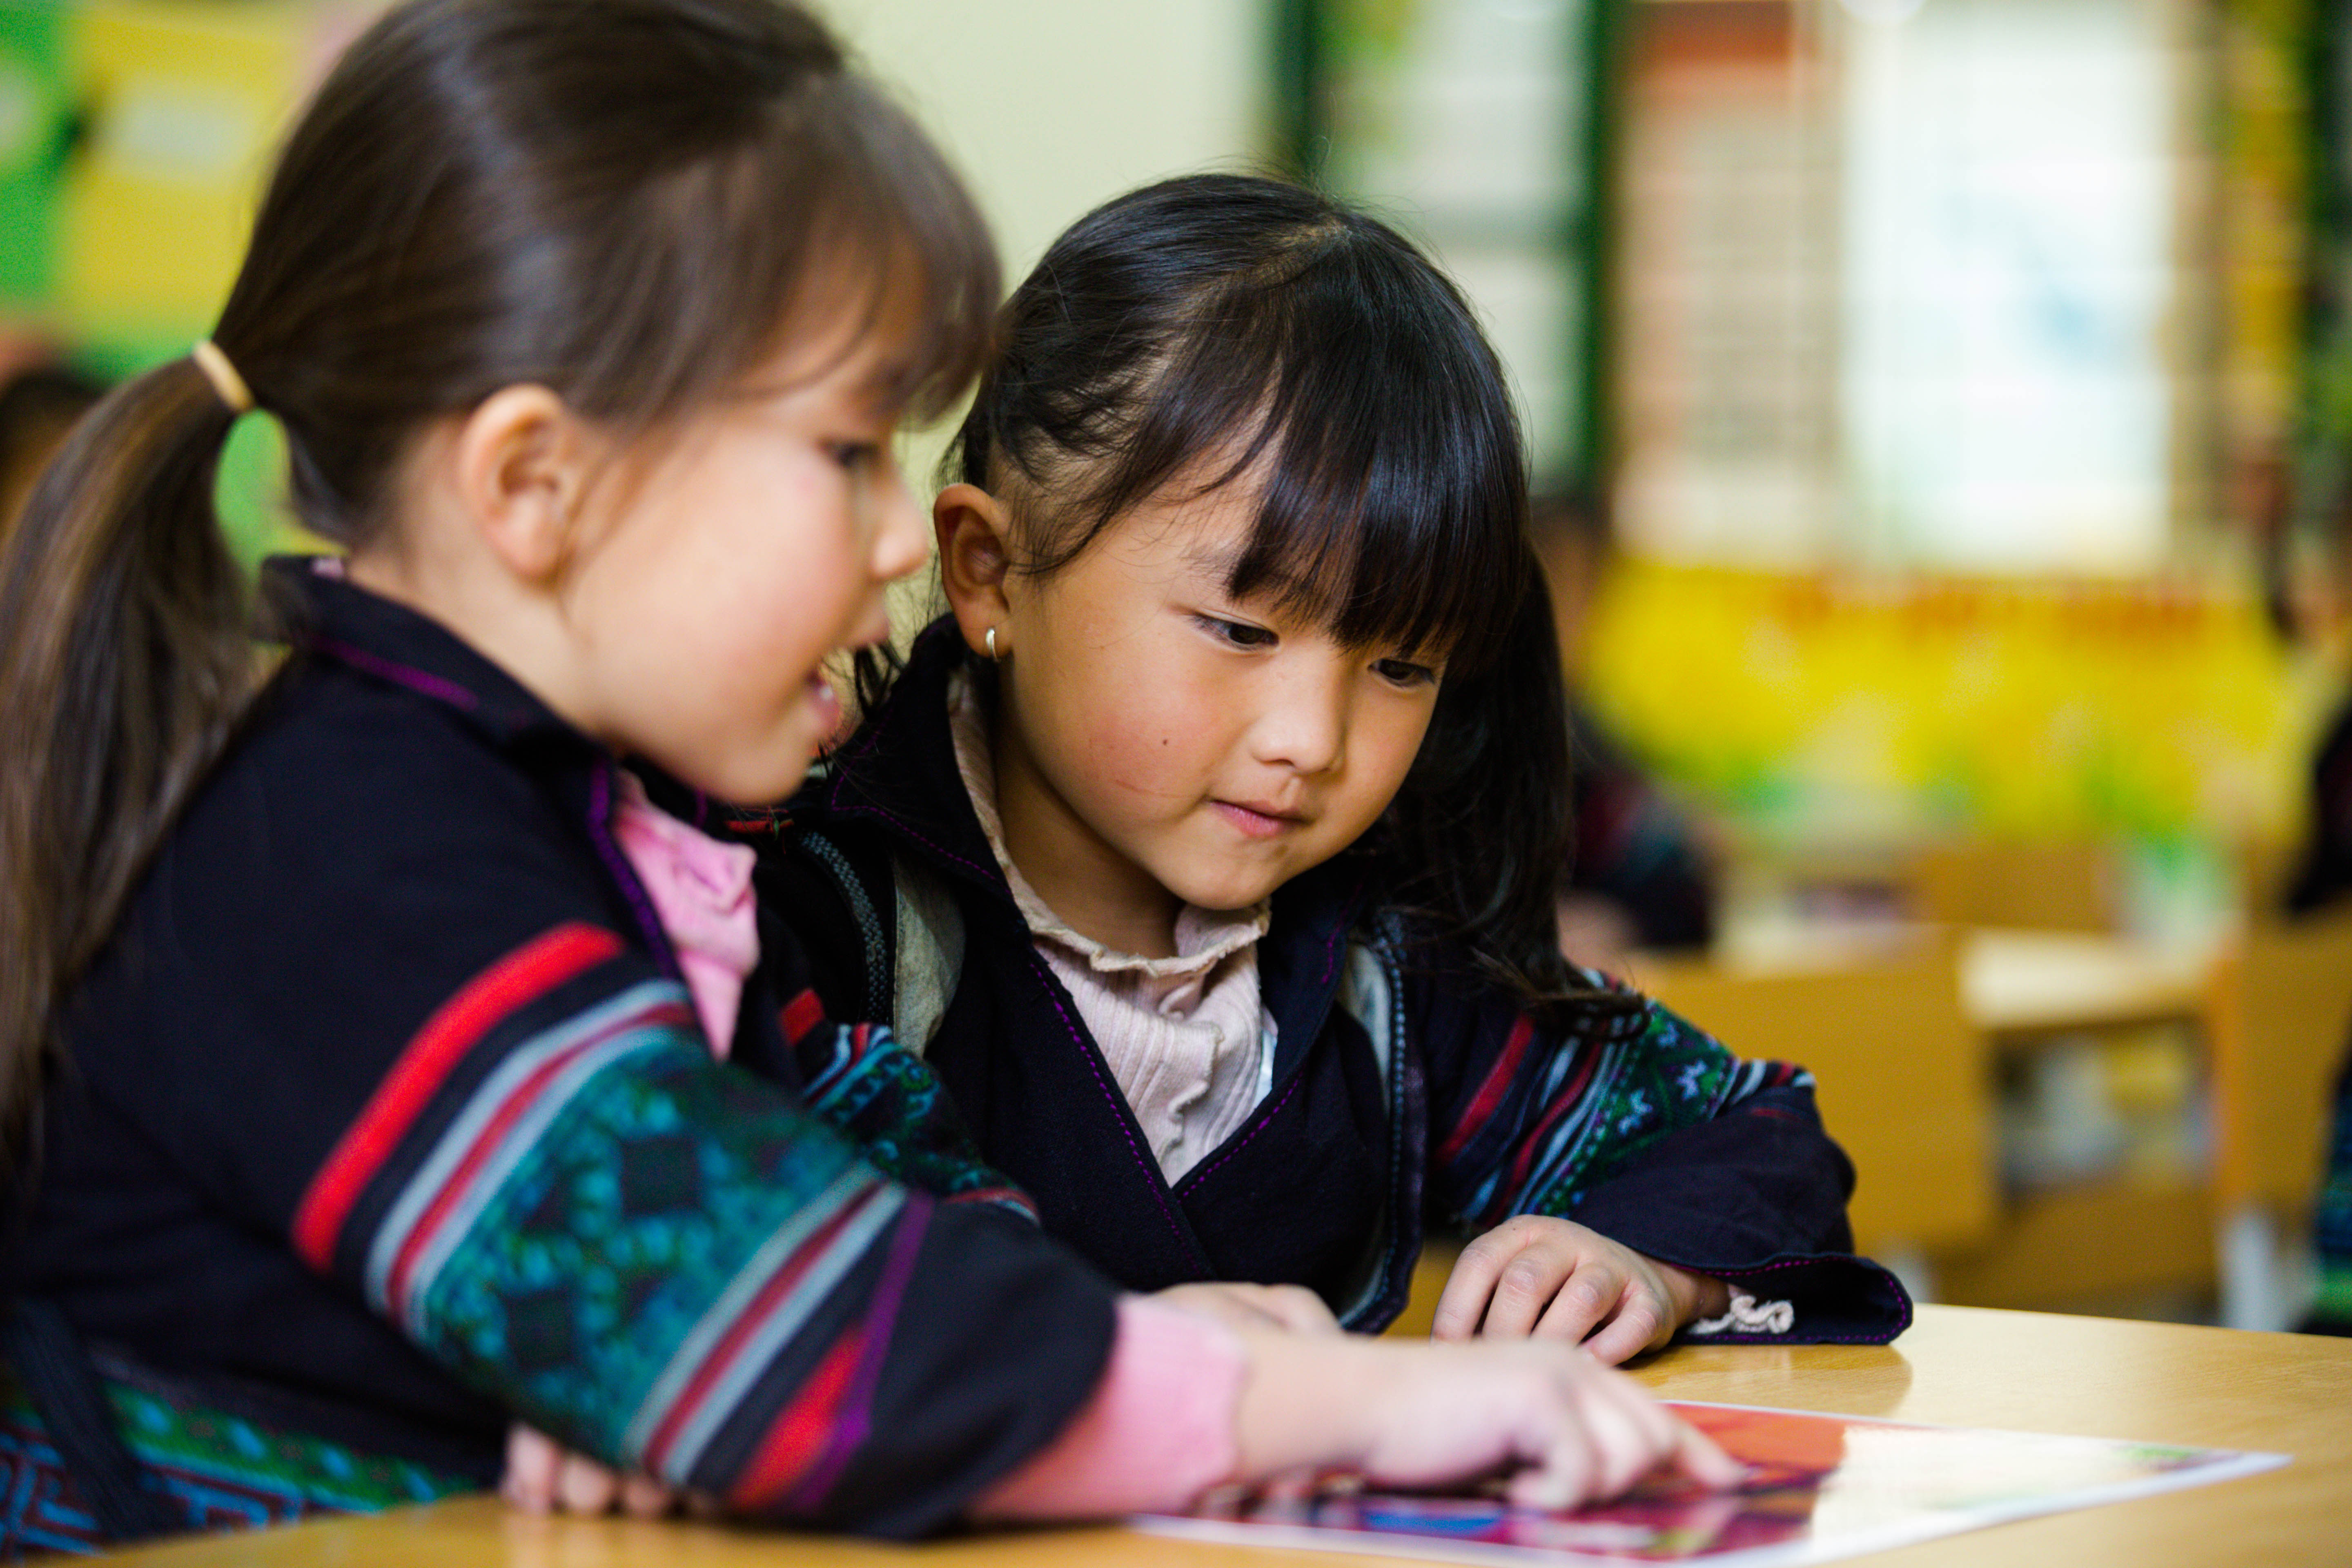 Two six-year-old girls sit at a desk in a classroom reading and pointing to a pamphlet.